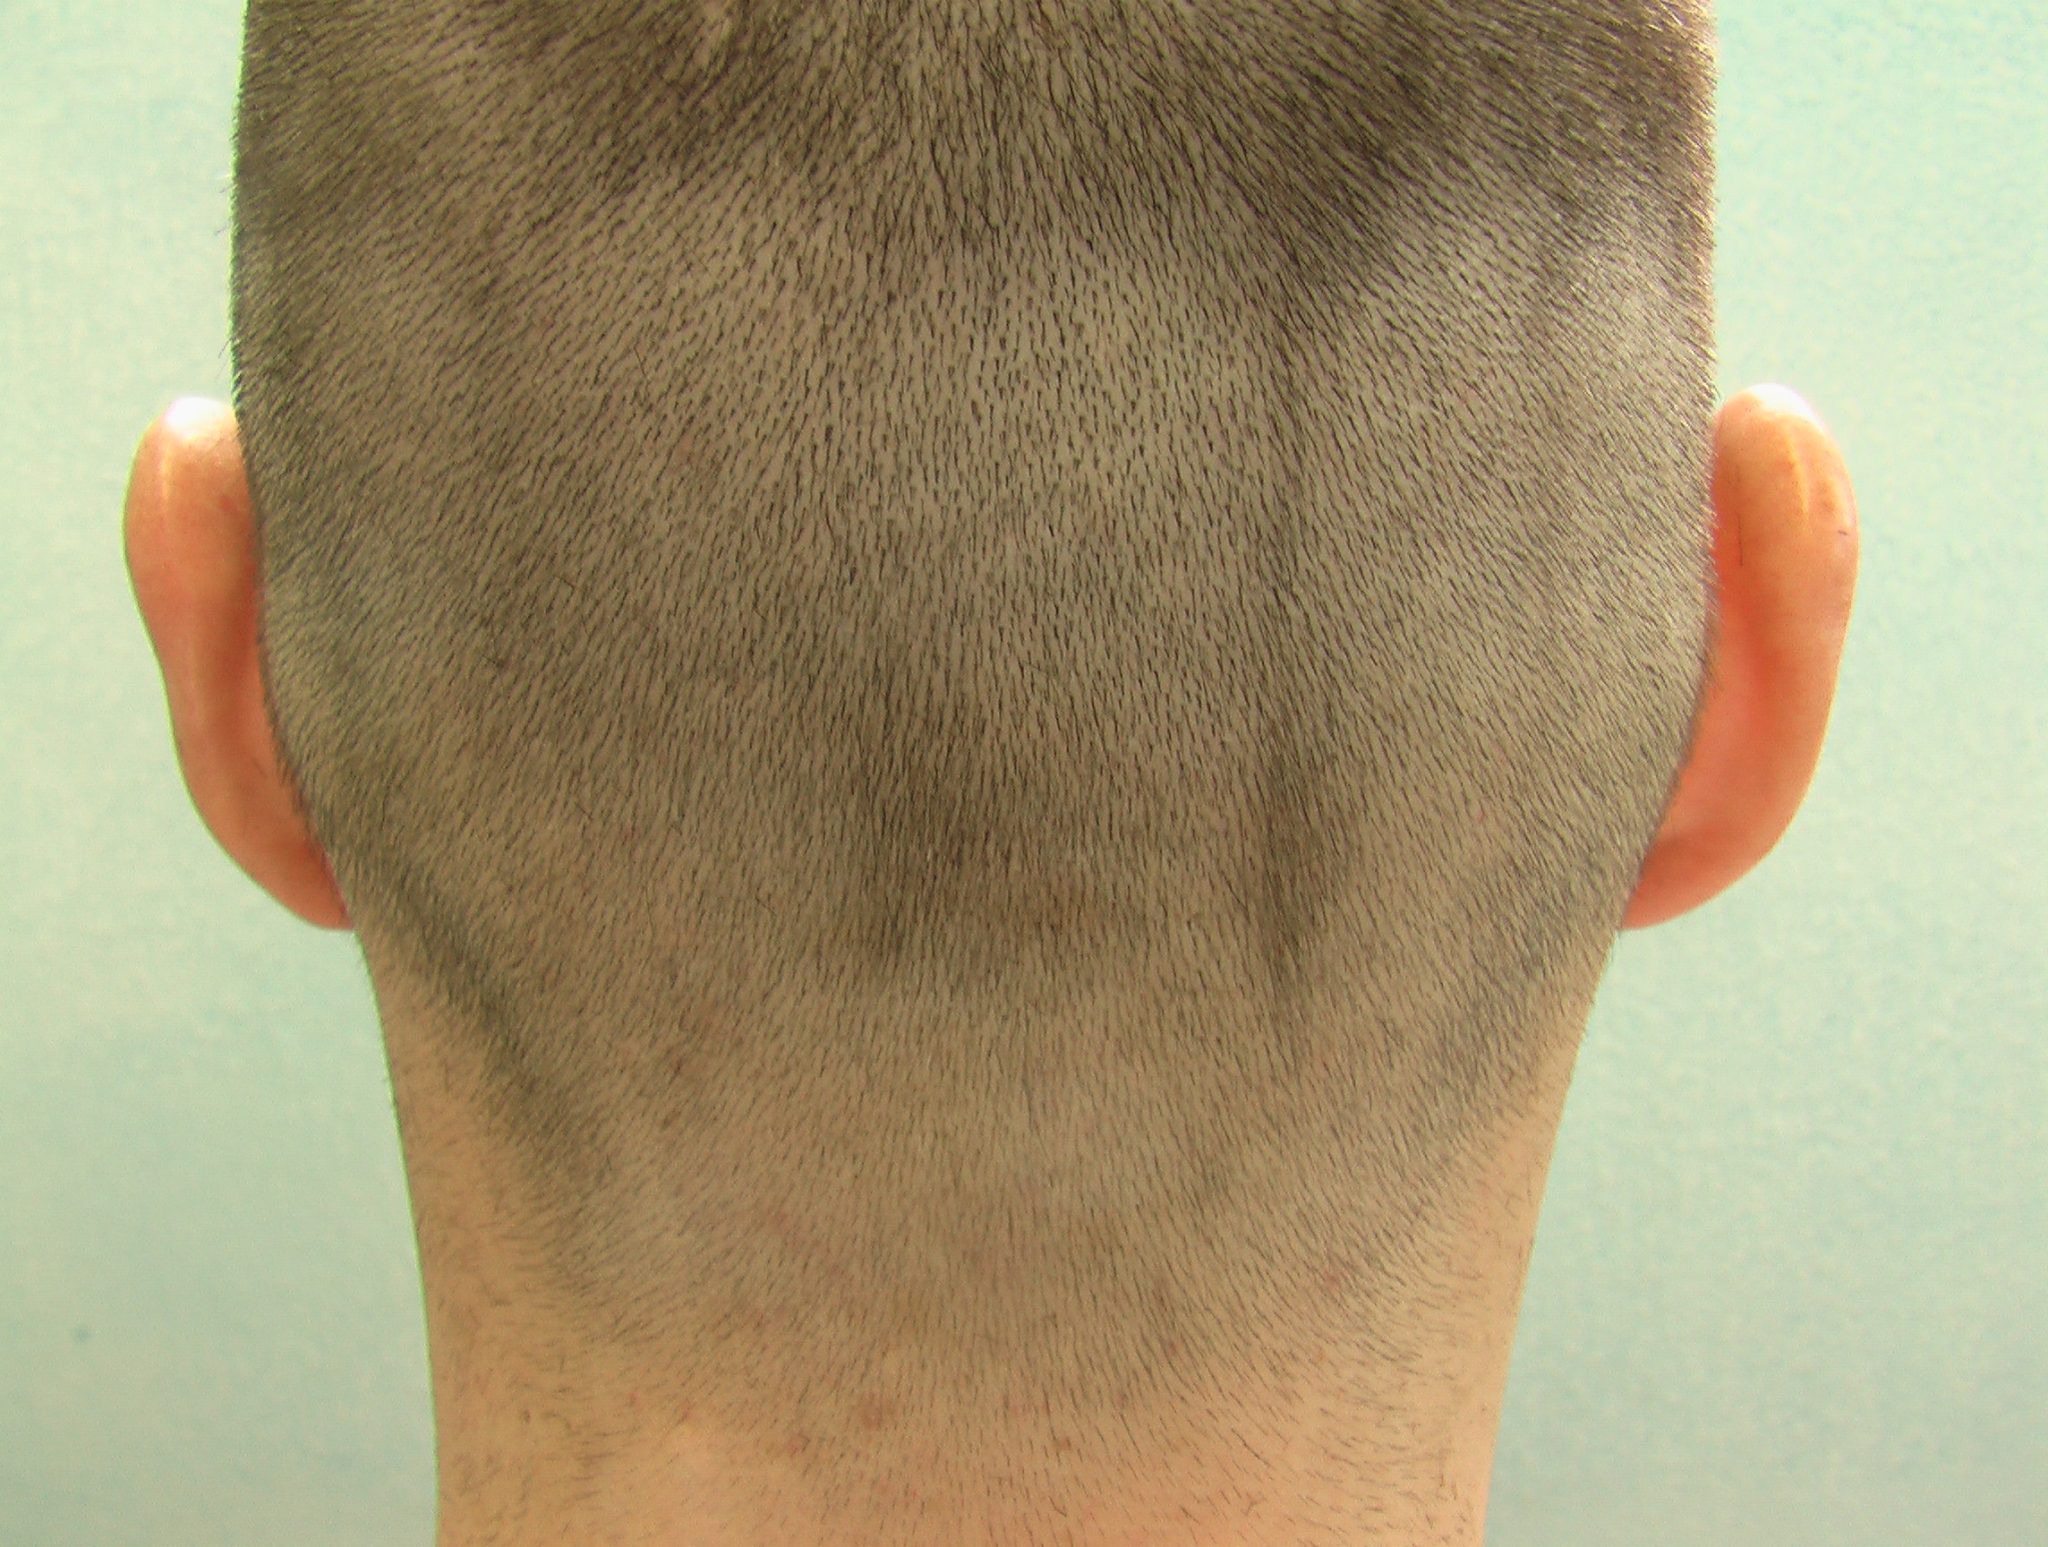 Follicular Unit Extraction Feasibility. Positive FUE Shave Test